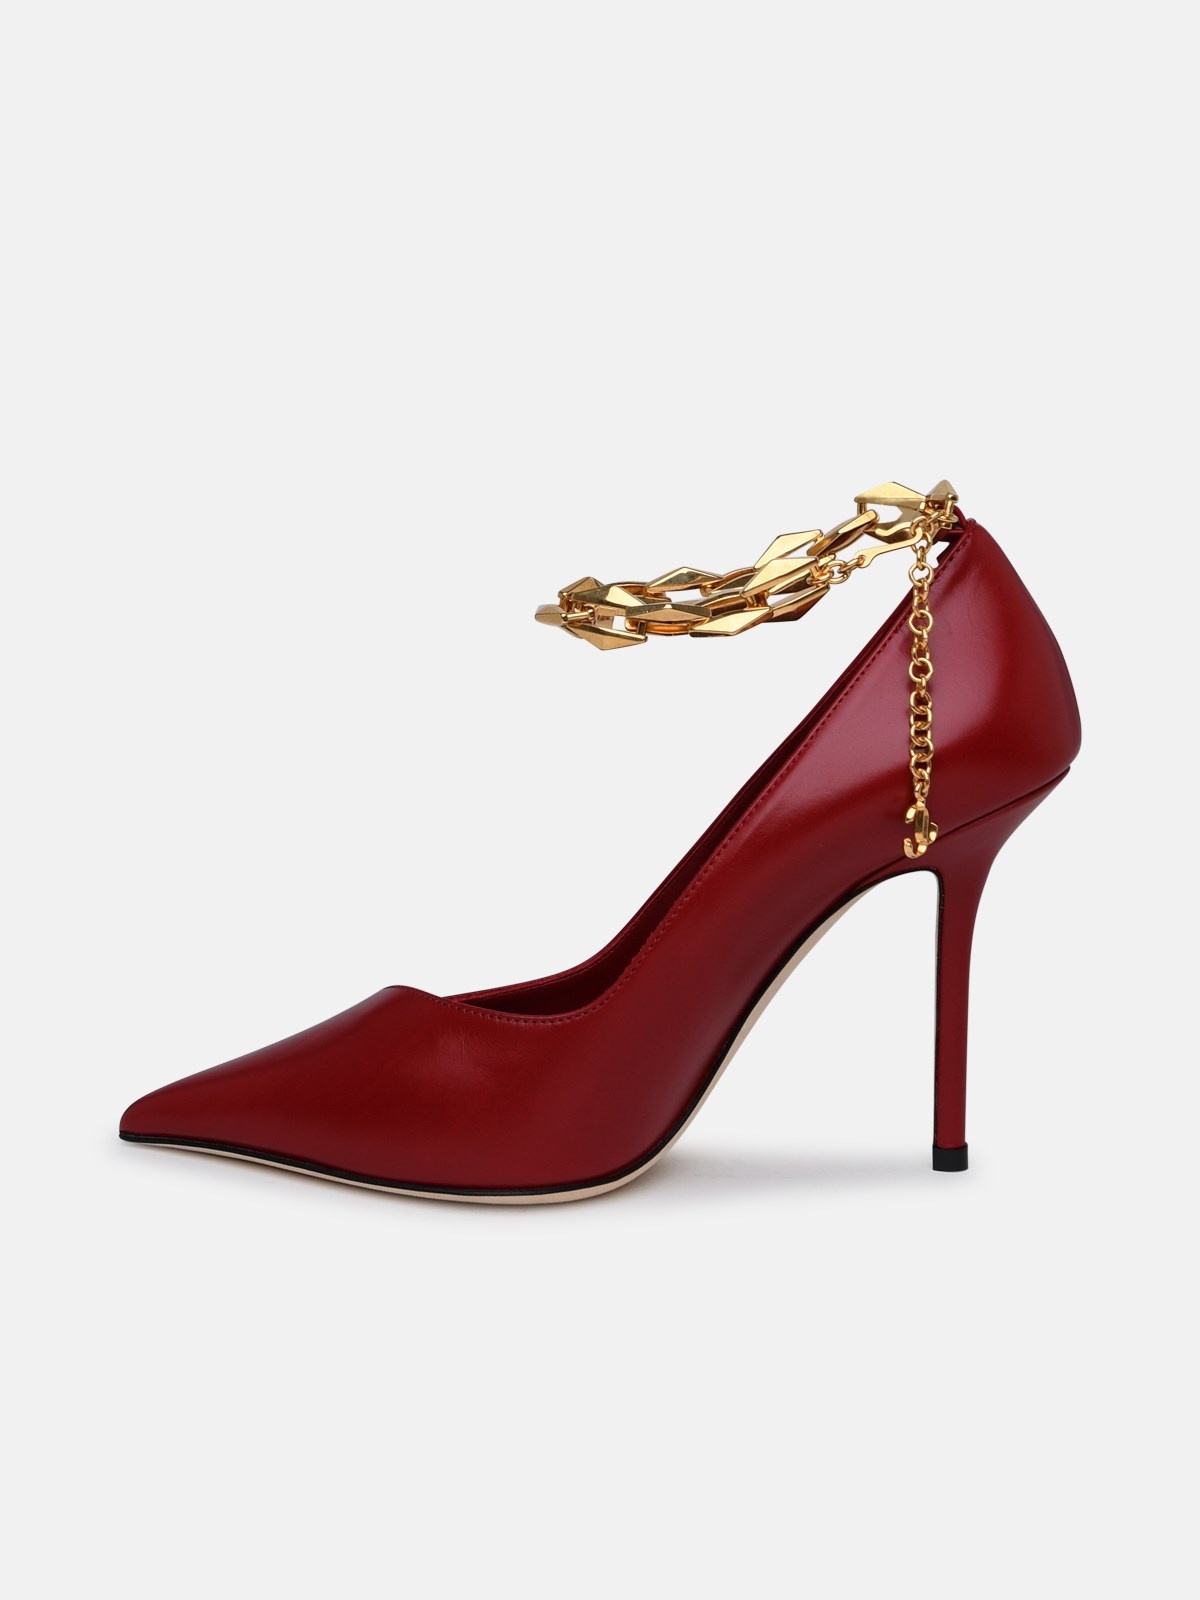 Diamond pumps in red leather - 3